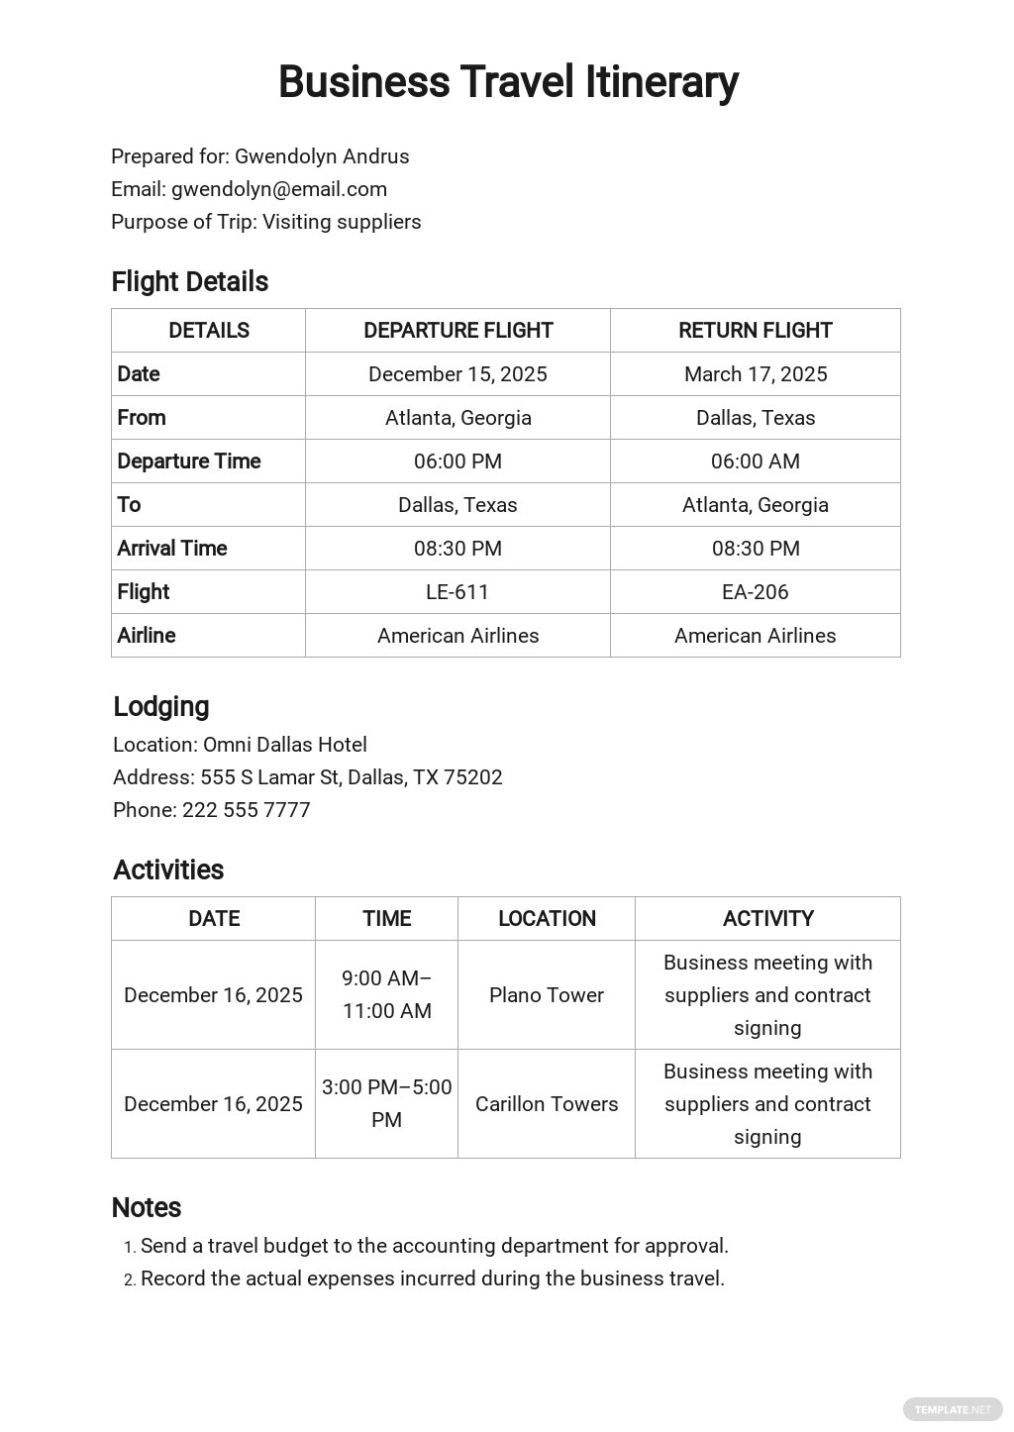 Executive Travel Itinerary Template [Free Pdf] - Google Docs, Google Throughout Sample Business Travel Itinerary Template